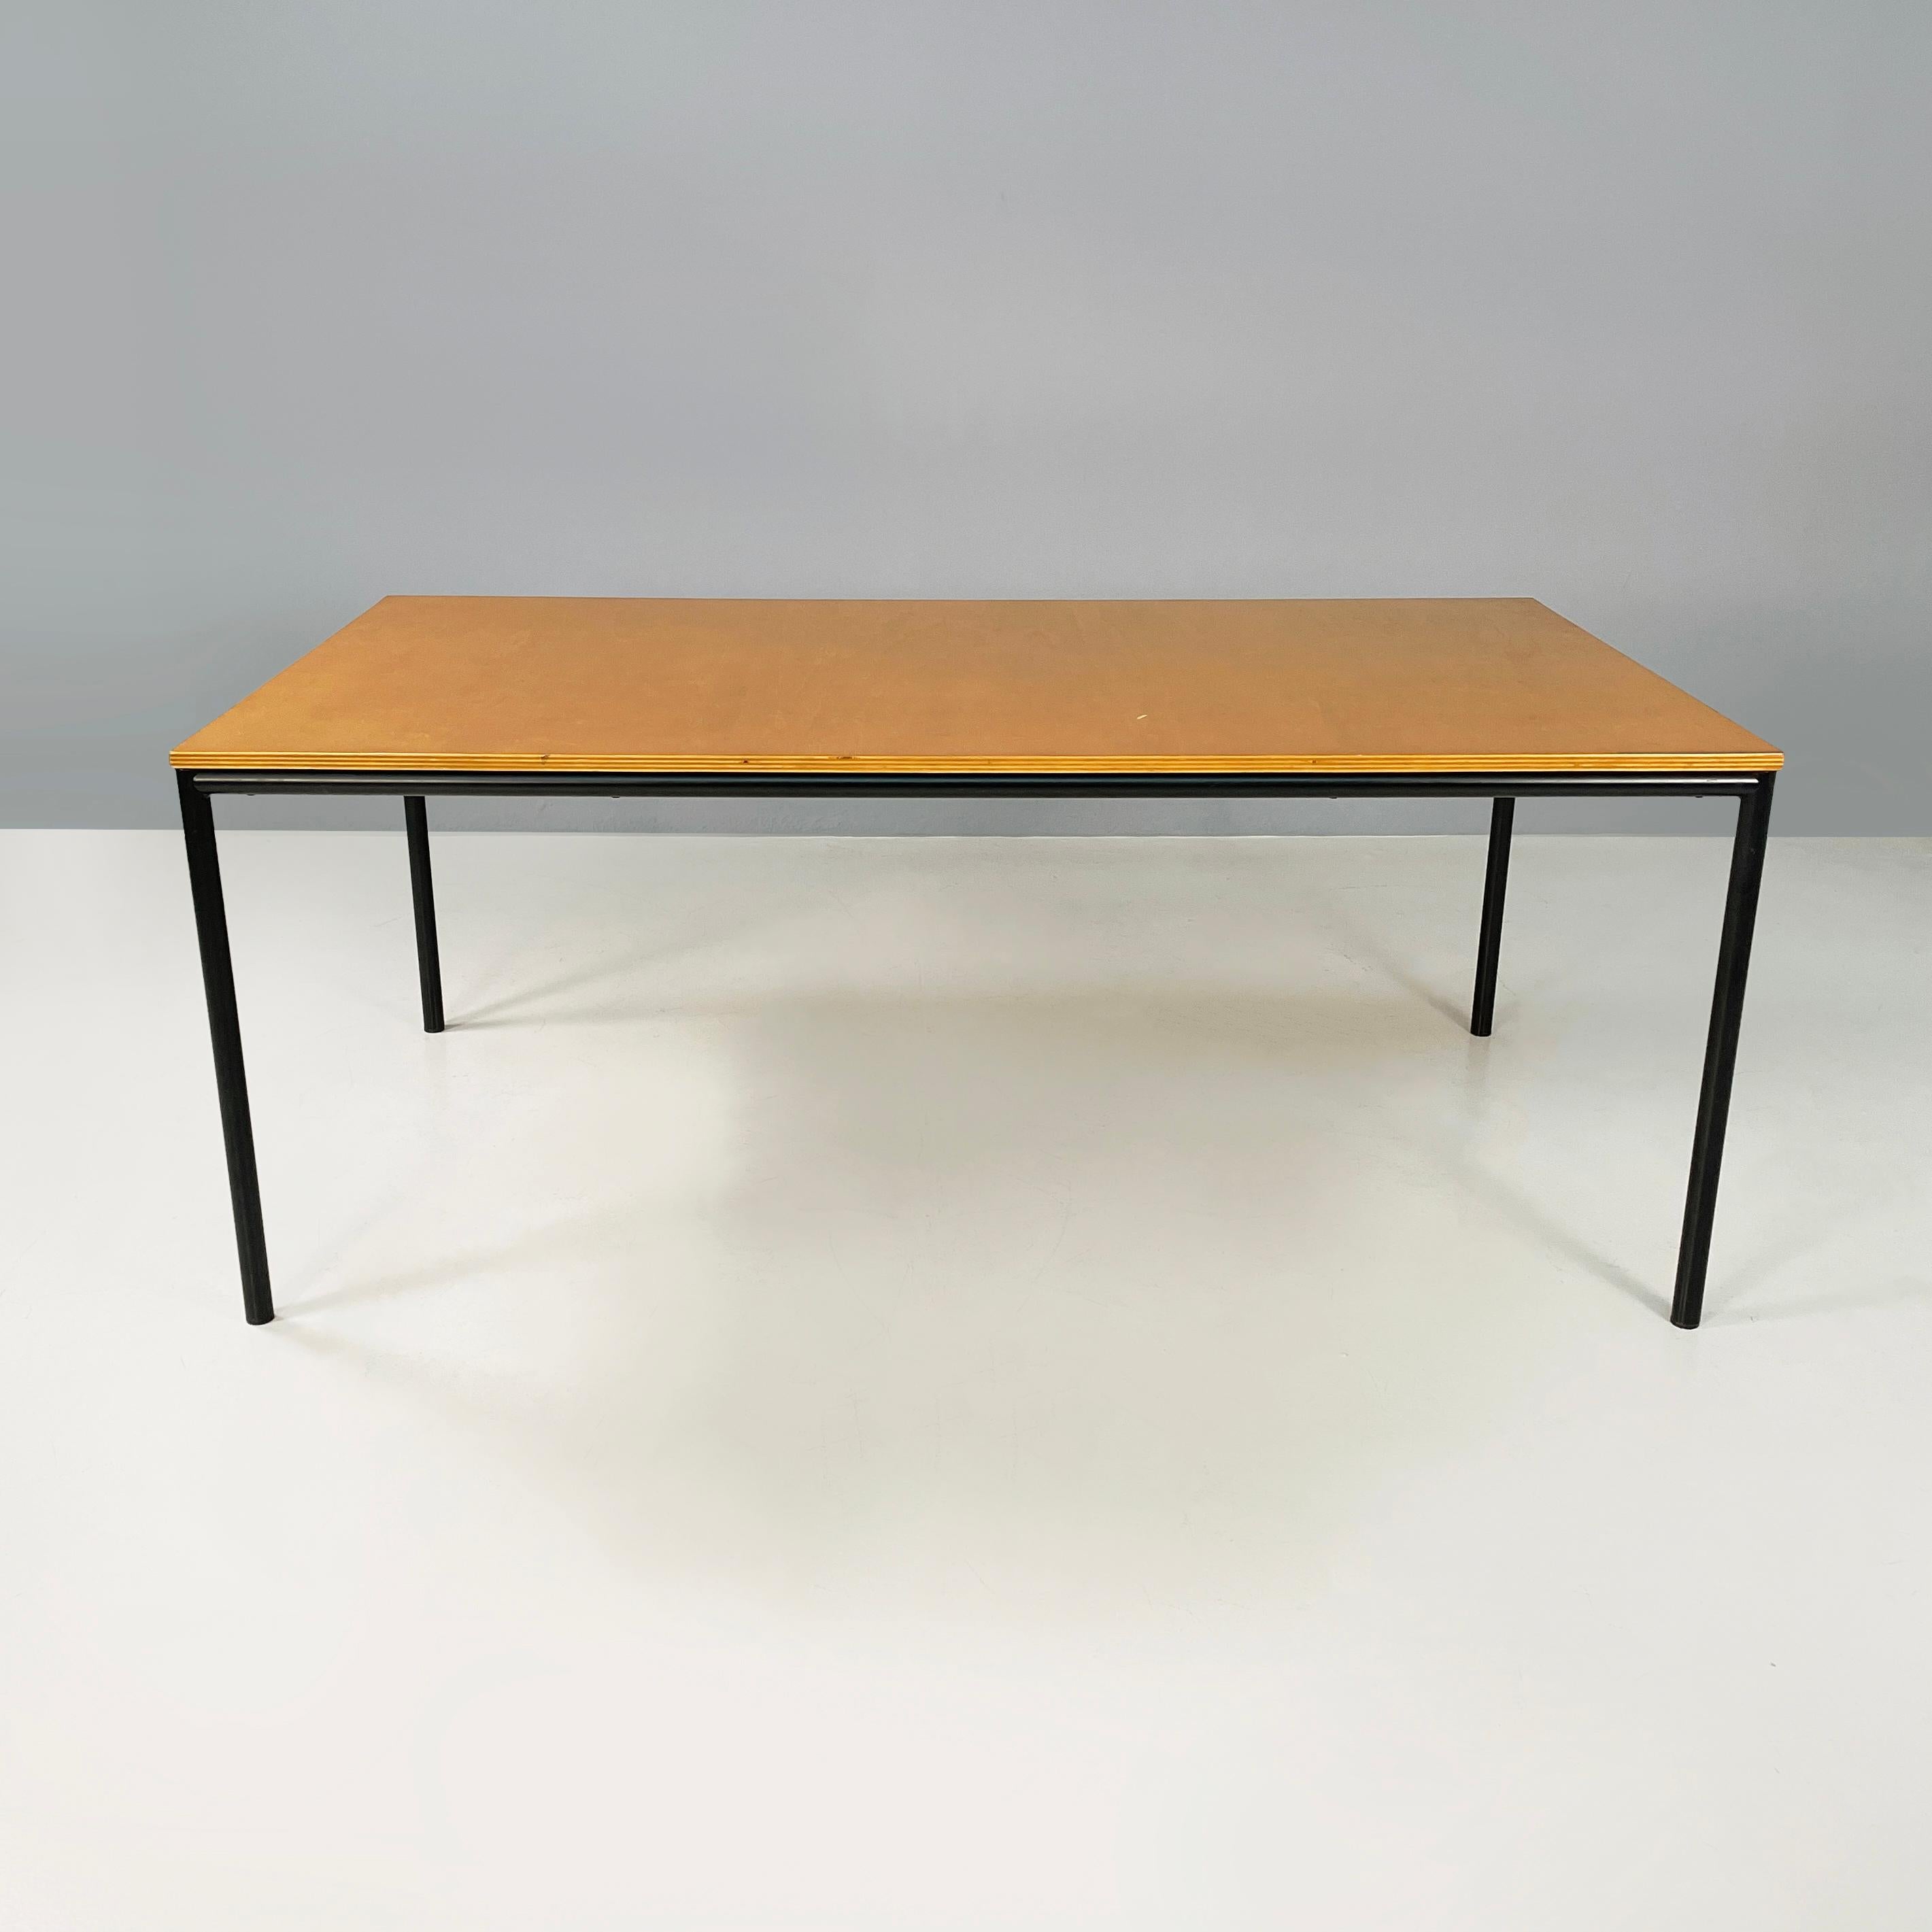 Italian modern Dining table or desk in wood and black metal, 1980s
Dining table or desk with rectangular top in light wood. The structure to which the top and legs are fixed are in black painted metal tubing.
1980 approx.
Good conditions. The top